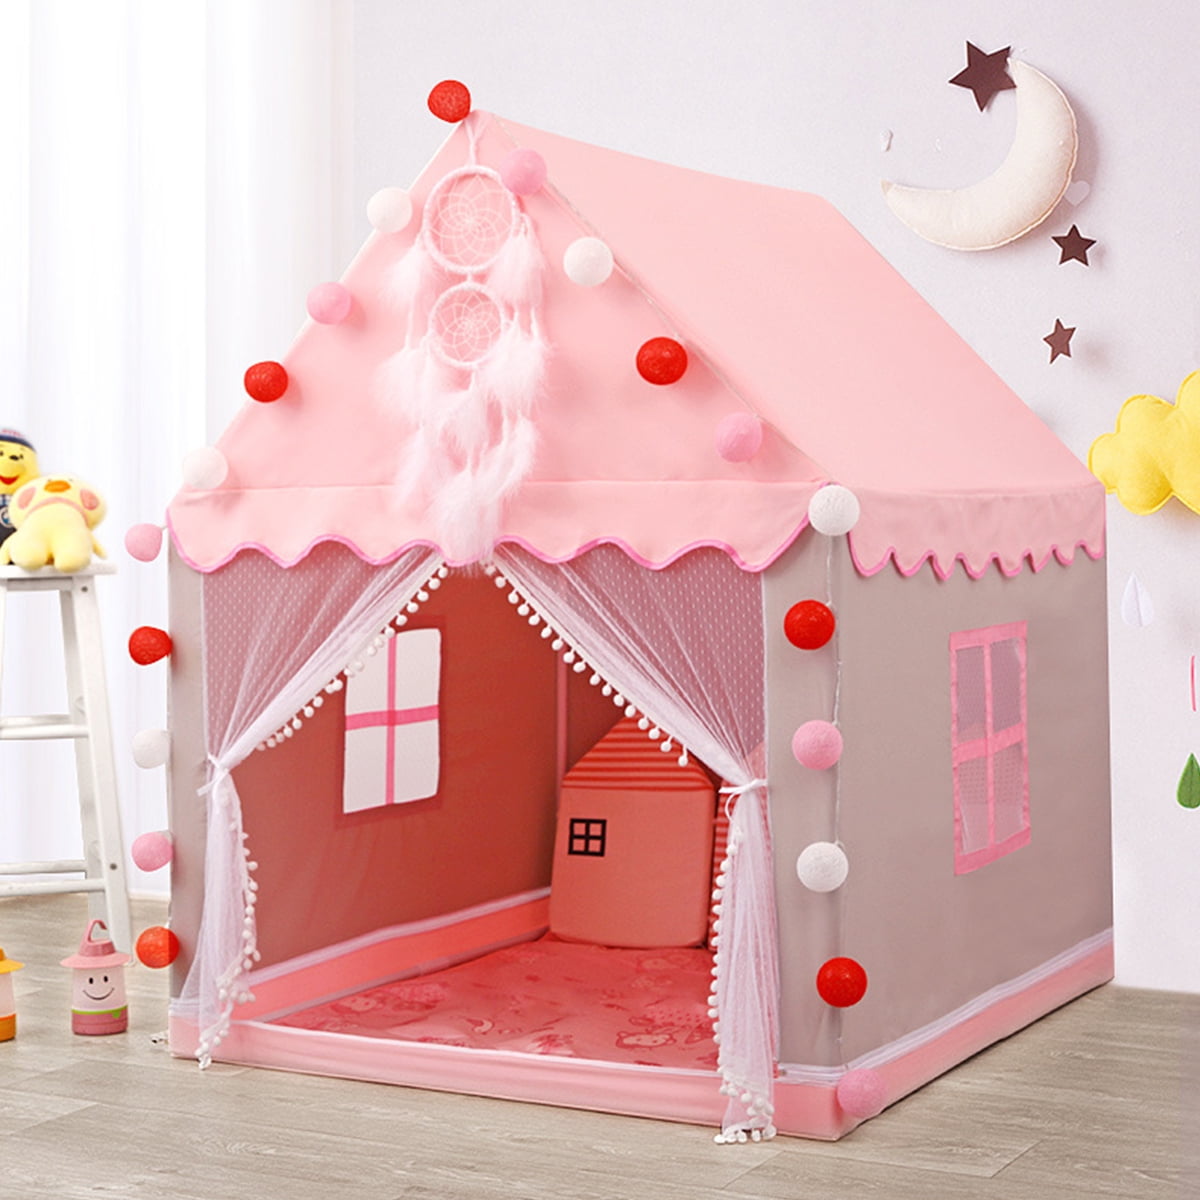 Kids Playhouse Girls Play Tent Princess Castle House Baby Childrens Holiday Gift 